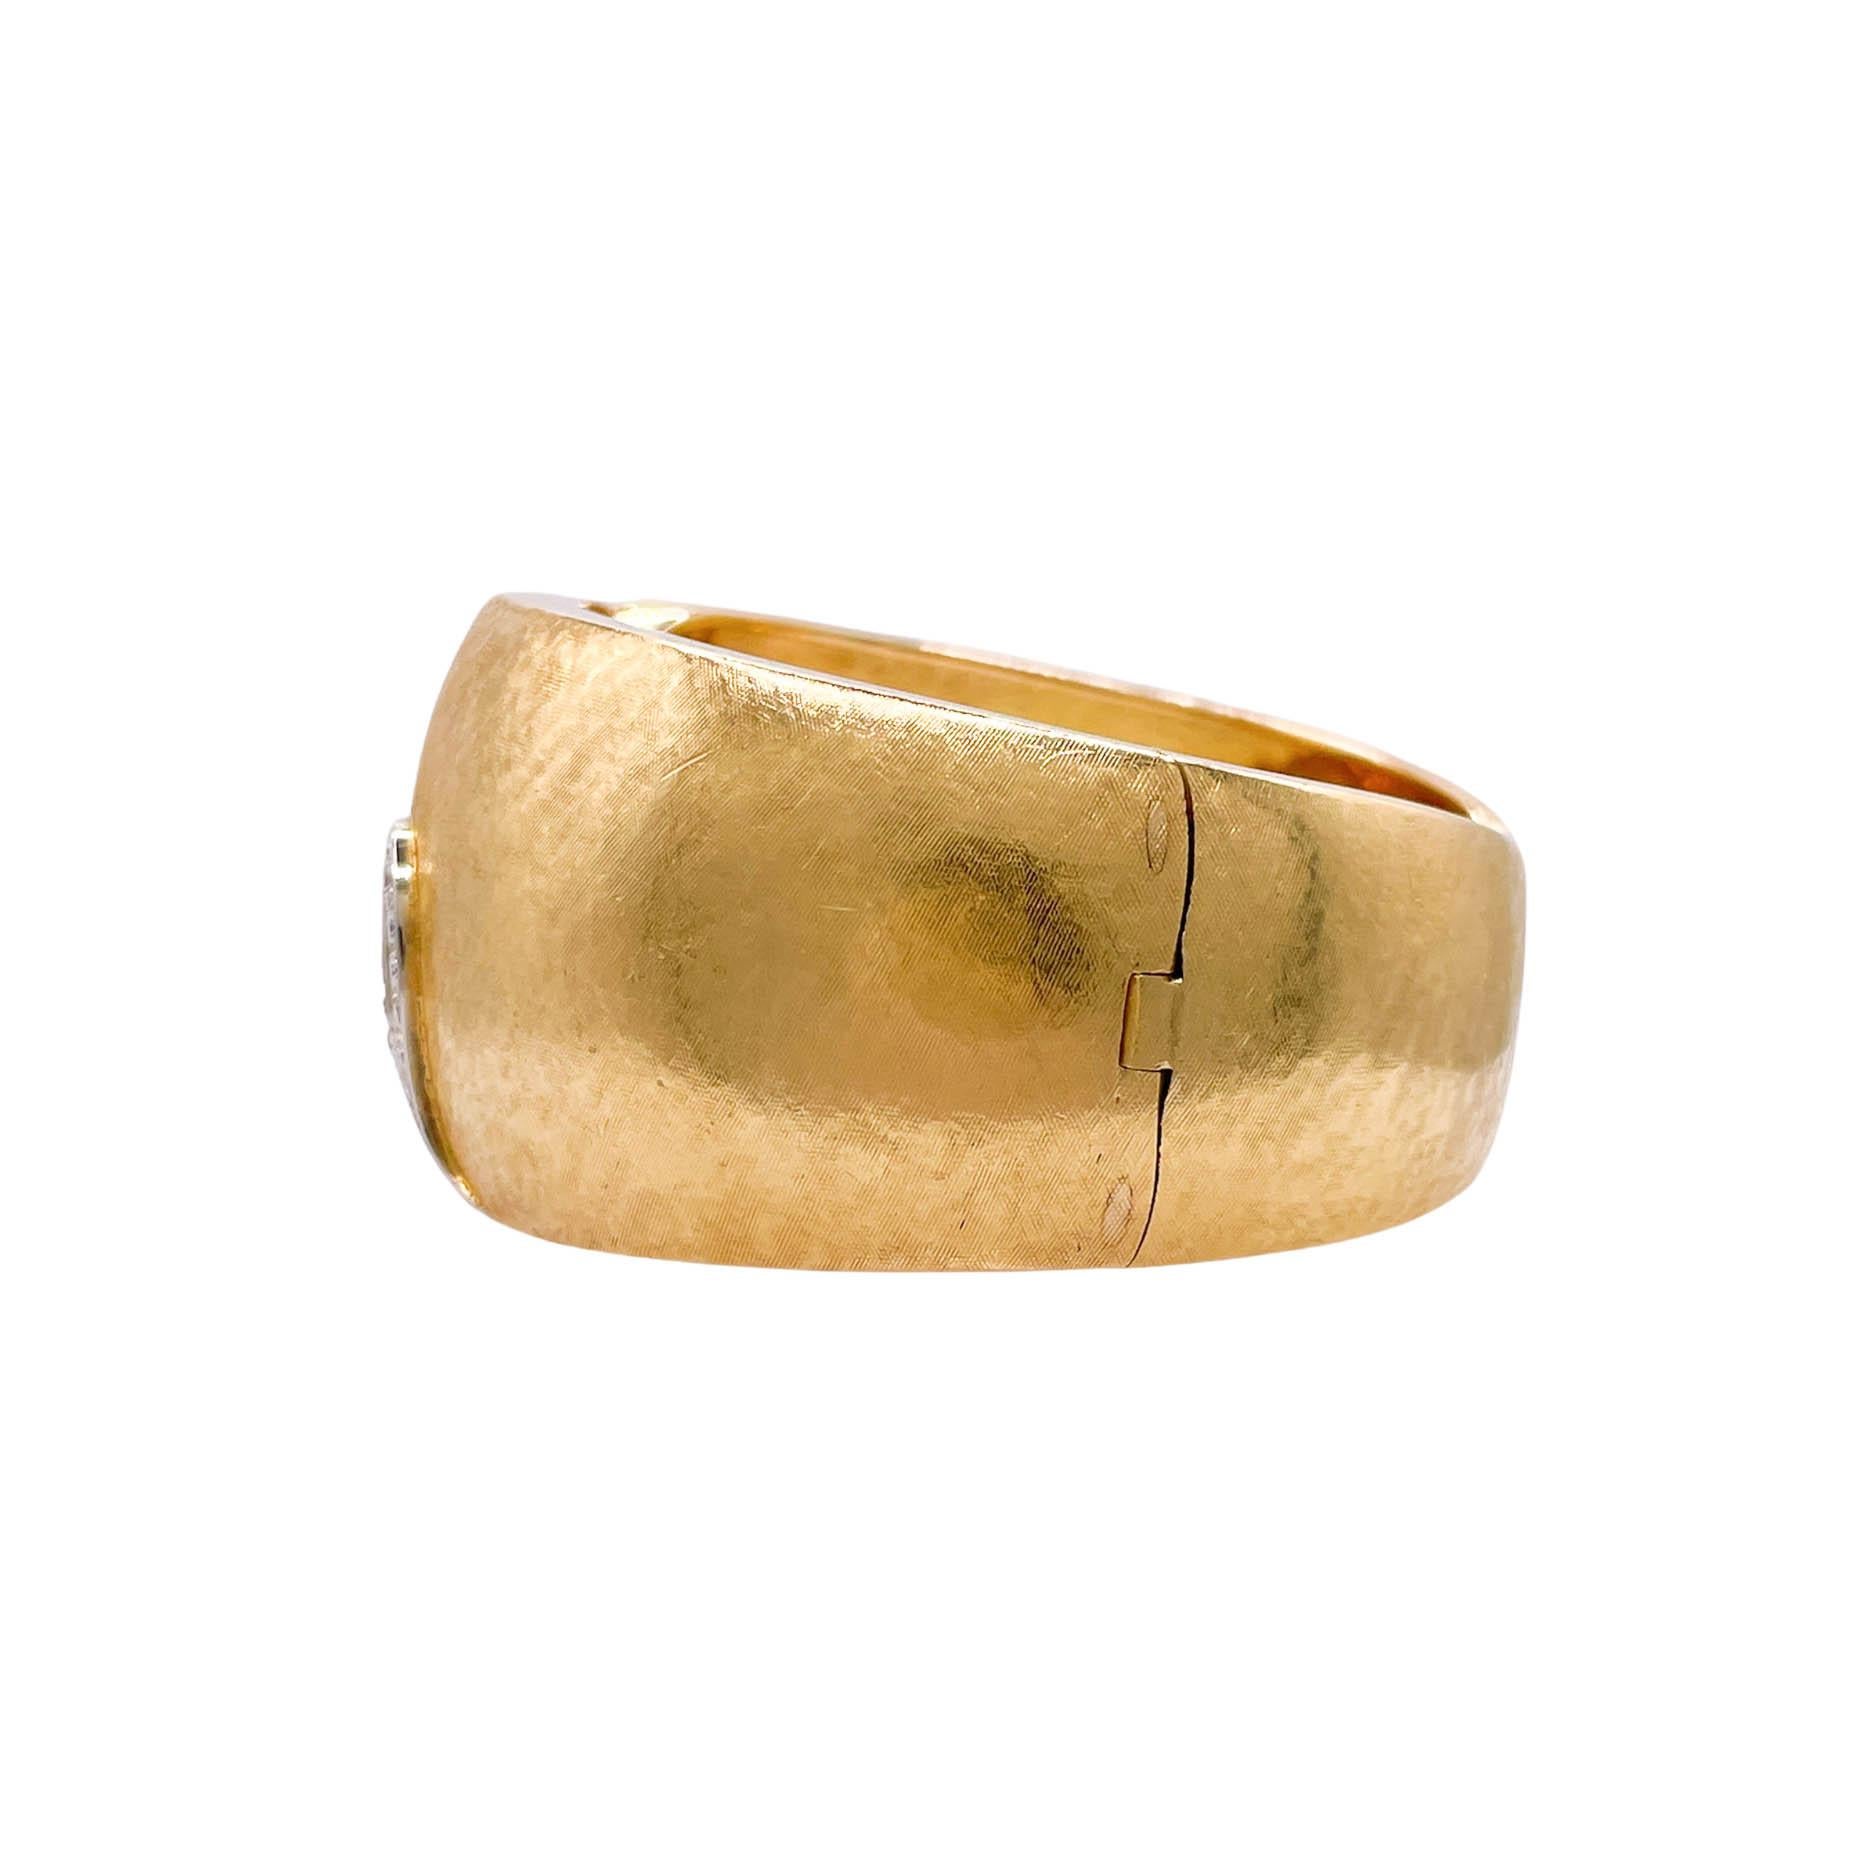 Jay Feder 18k Yellow Gold Diamond Accent Wide Cuff Bracelet In Good Condition For Sale In Boca Raton, FL